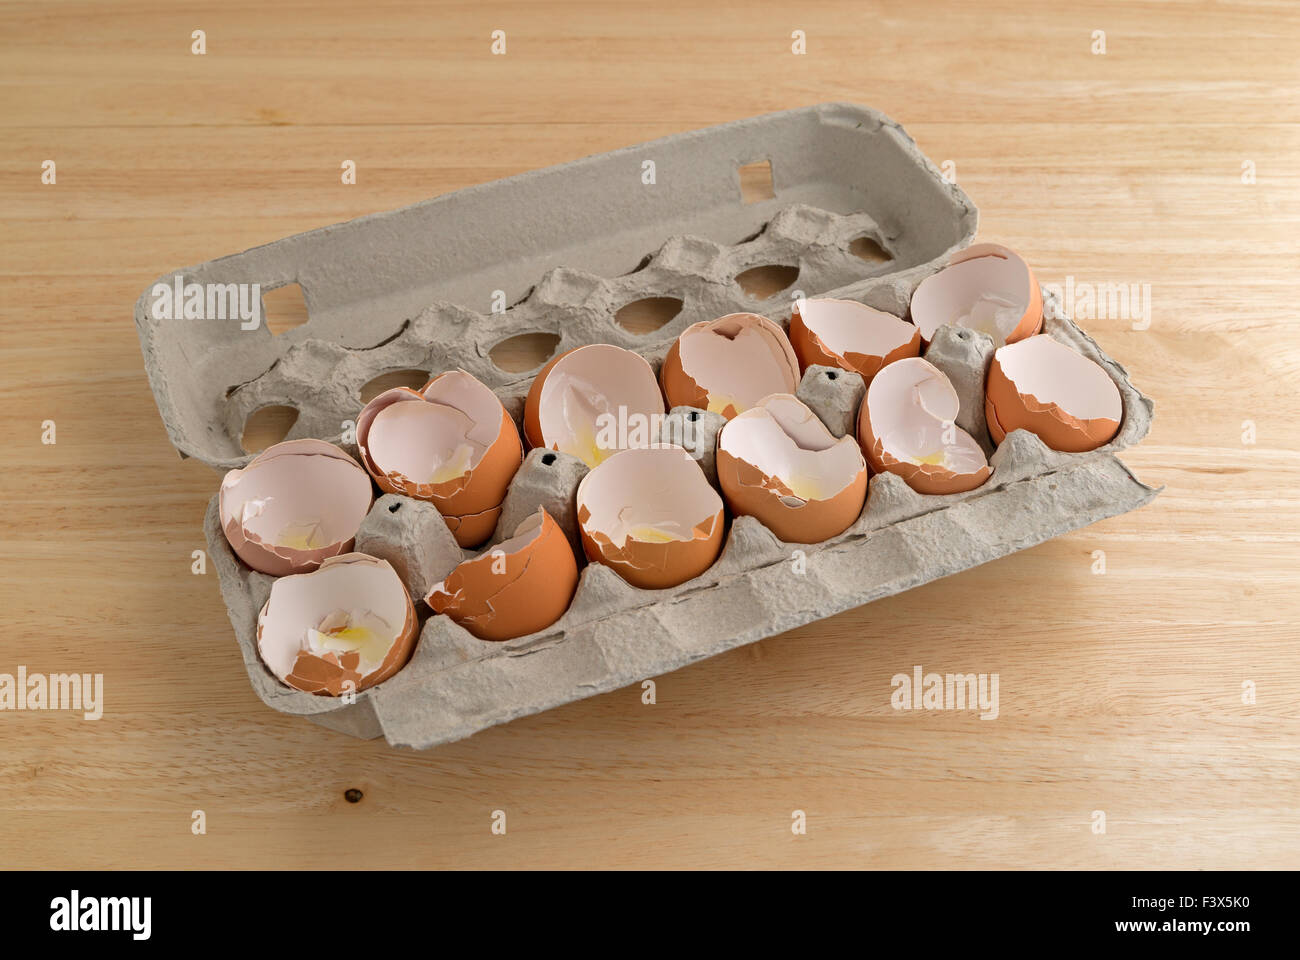 A dozen broken eggshells in an opened cardboard container on a wood counter top illuminated with natural light. Stock Photo